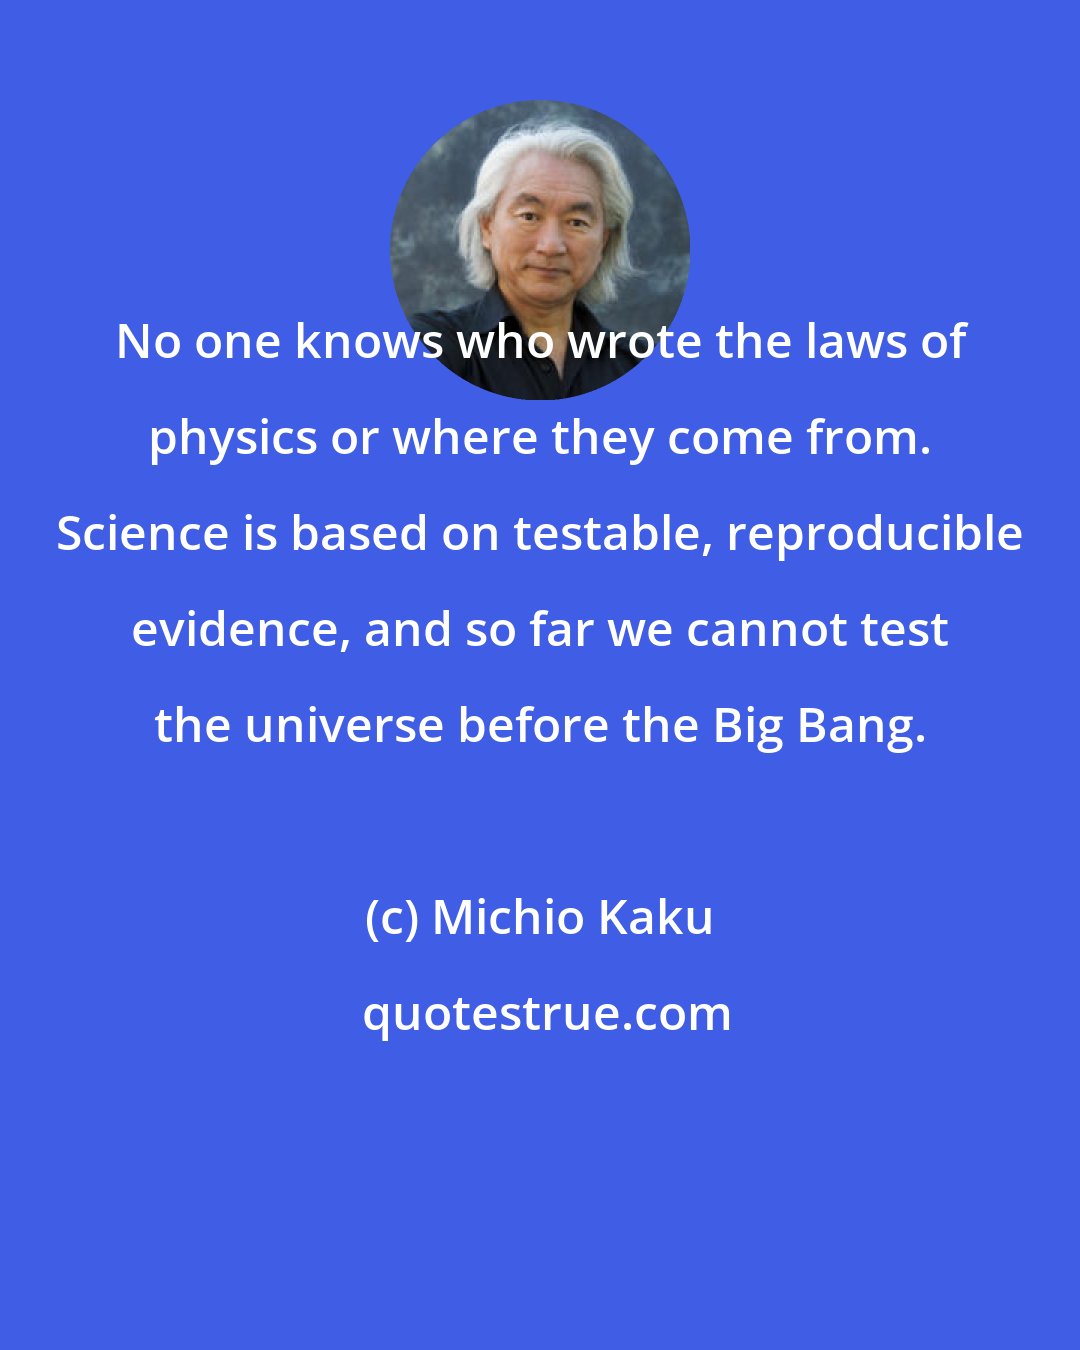 Michio Kaku: No one knows who wrote the laws of physics or where they come from. Science is based on testable, reproducible evidence, and so far we cannot test the universe before the Big Bang.